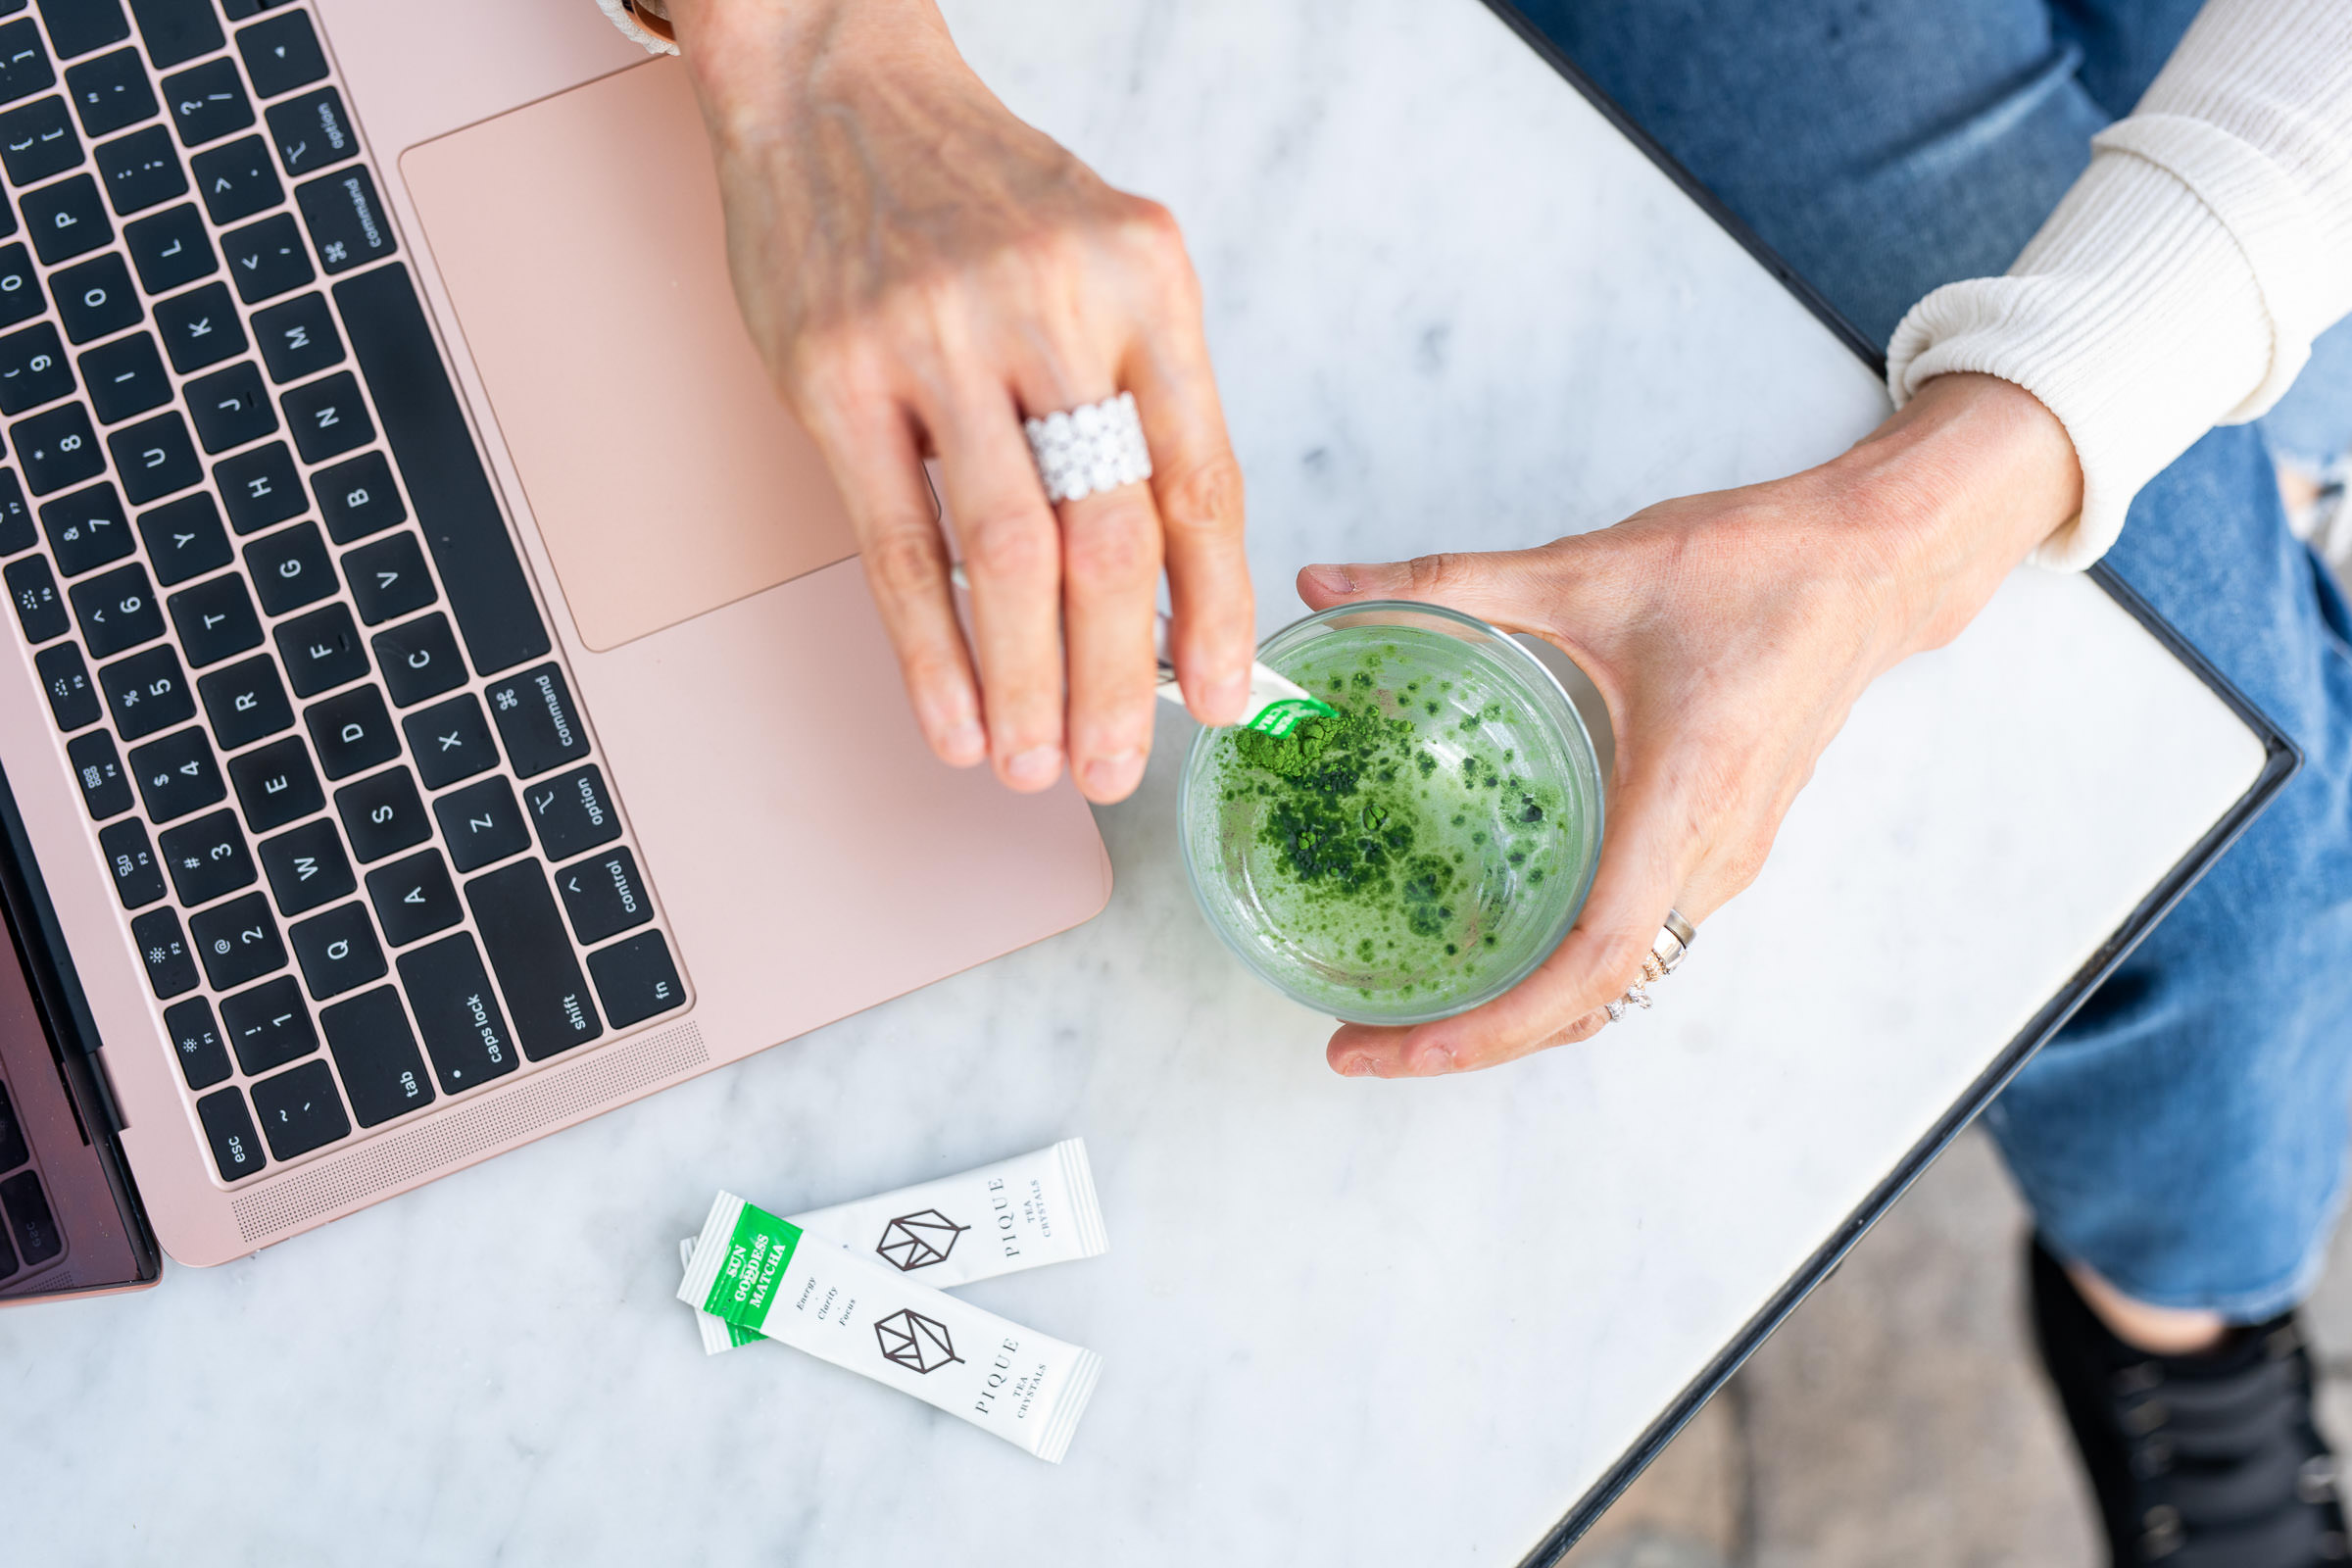 Hero Shot. Woman stirring a matcha drink next to her laptop for her brand photography photo shoot.